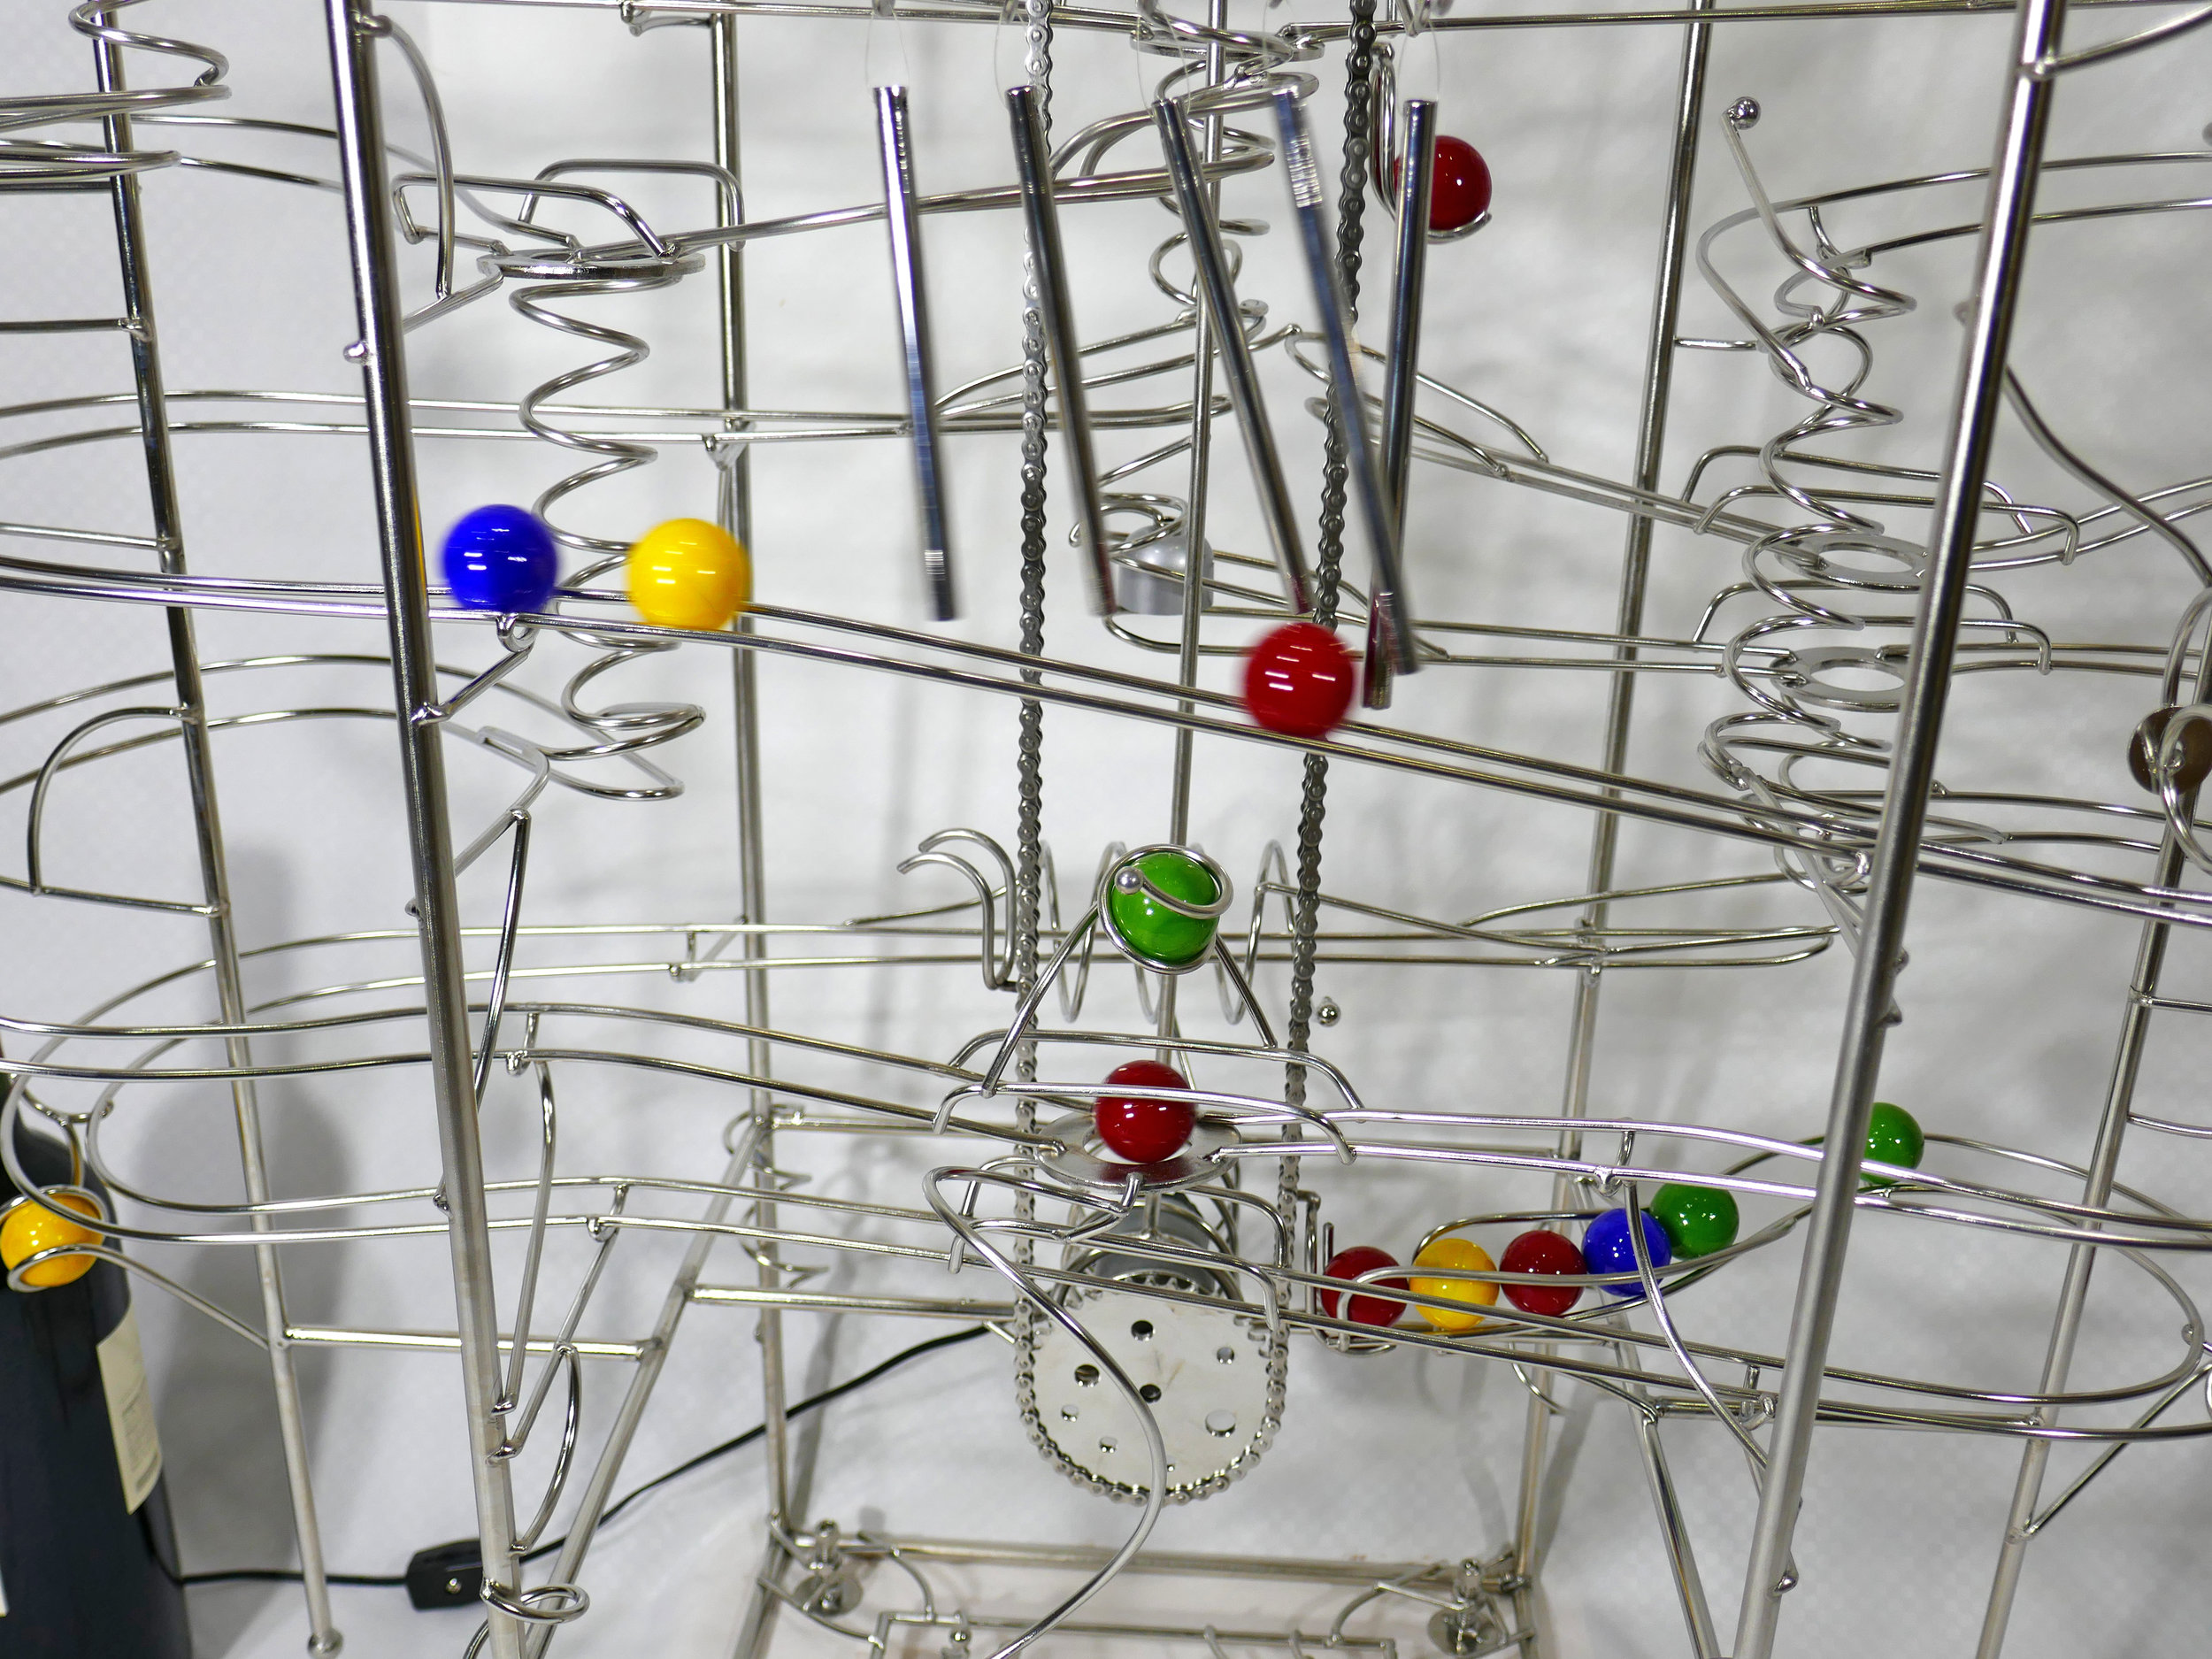 Rolling ball marble run machine - close up of marbles striking the hand made chimes - Stephen Jendro